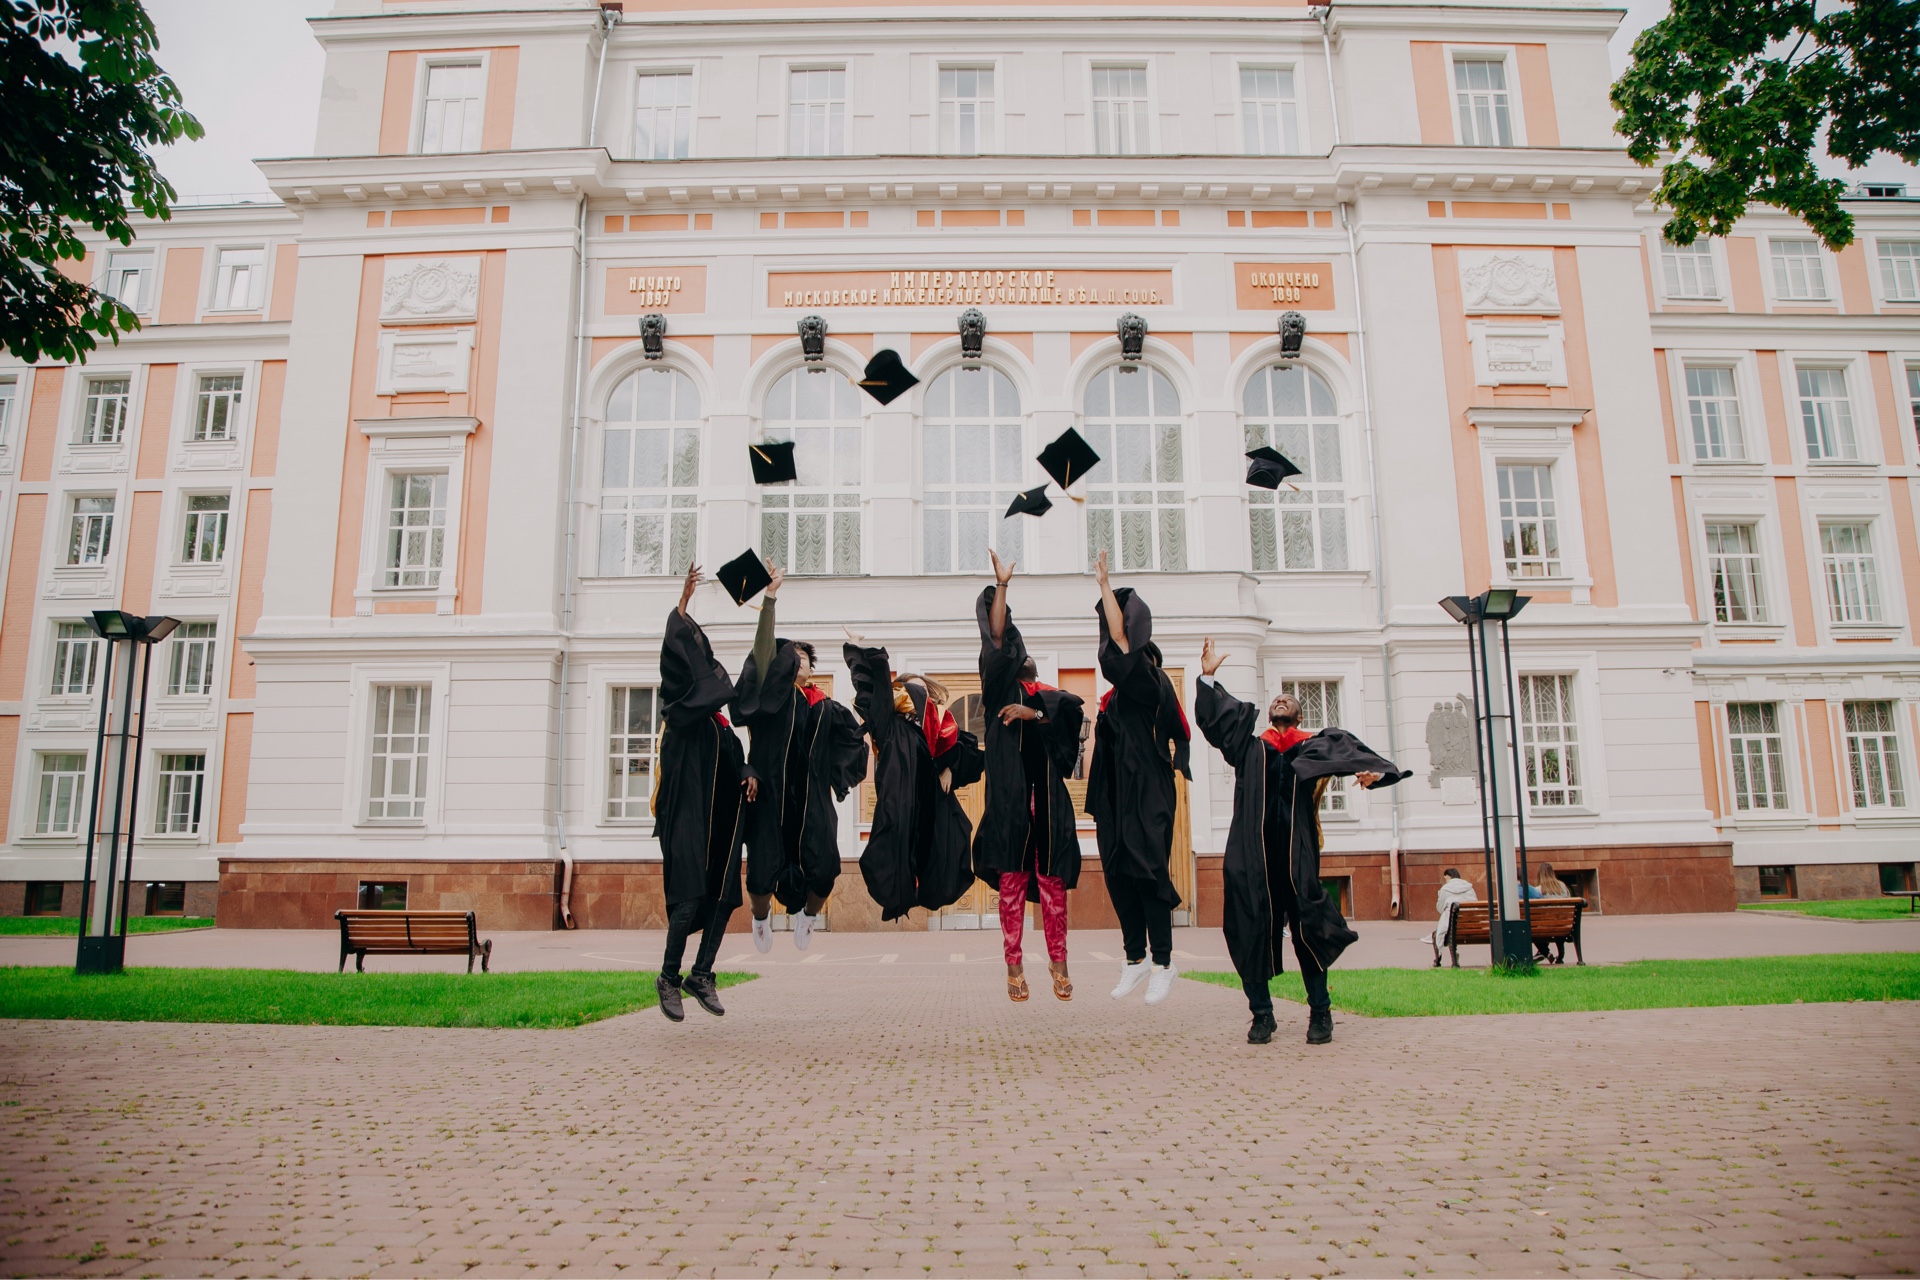 Photo; In the background you can see a white-apricot-colored building; right and left are some branches of trees with green foliage; in the middle of the picture are 6 graduates in black robes. They jump and throw black doctor hats into the air.